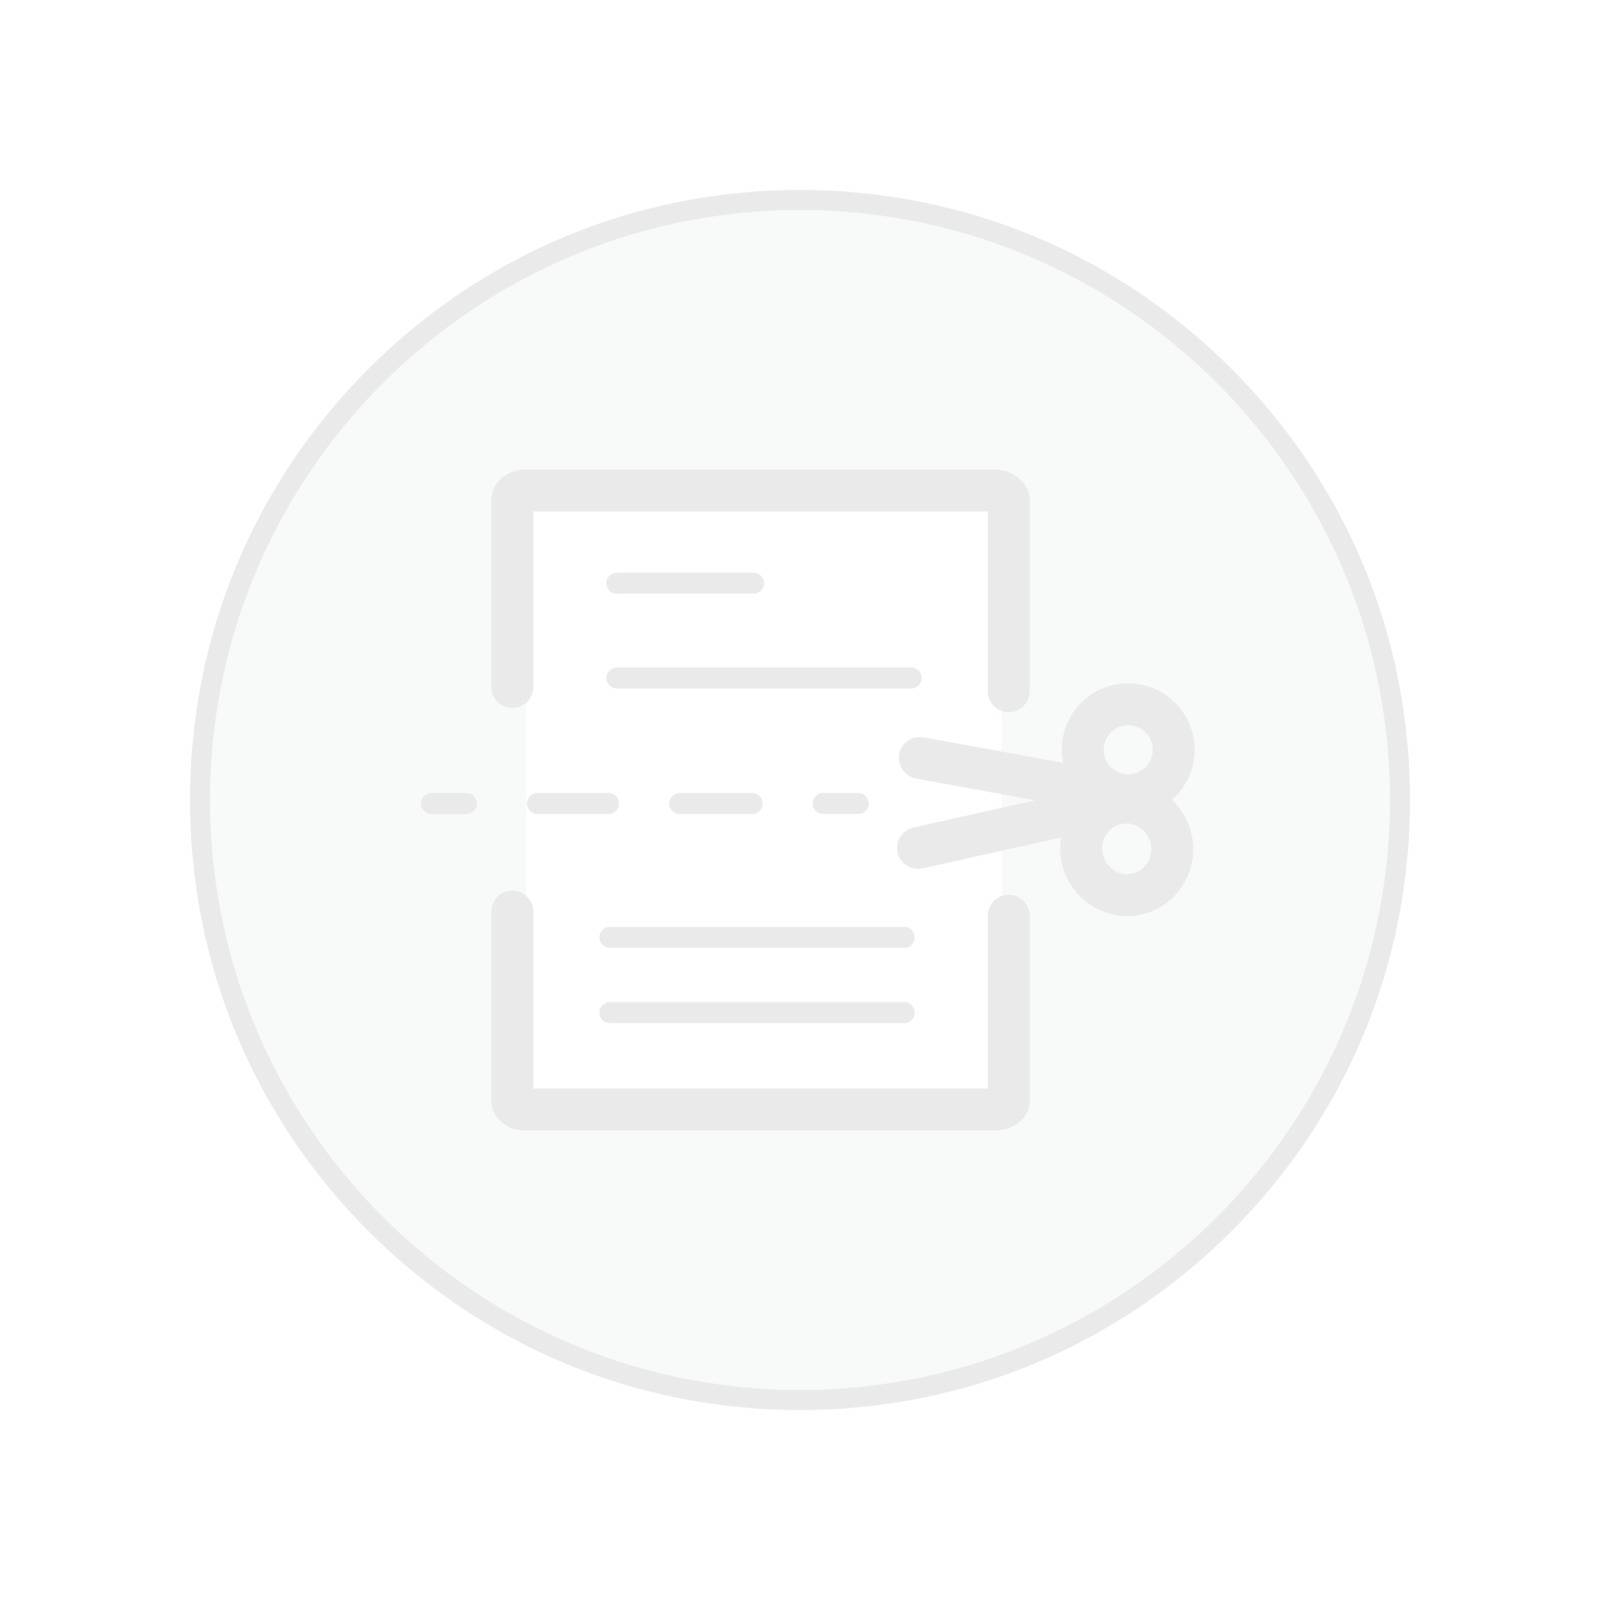 office paper and scissors  white button icon by PAPAGraph